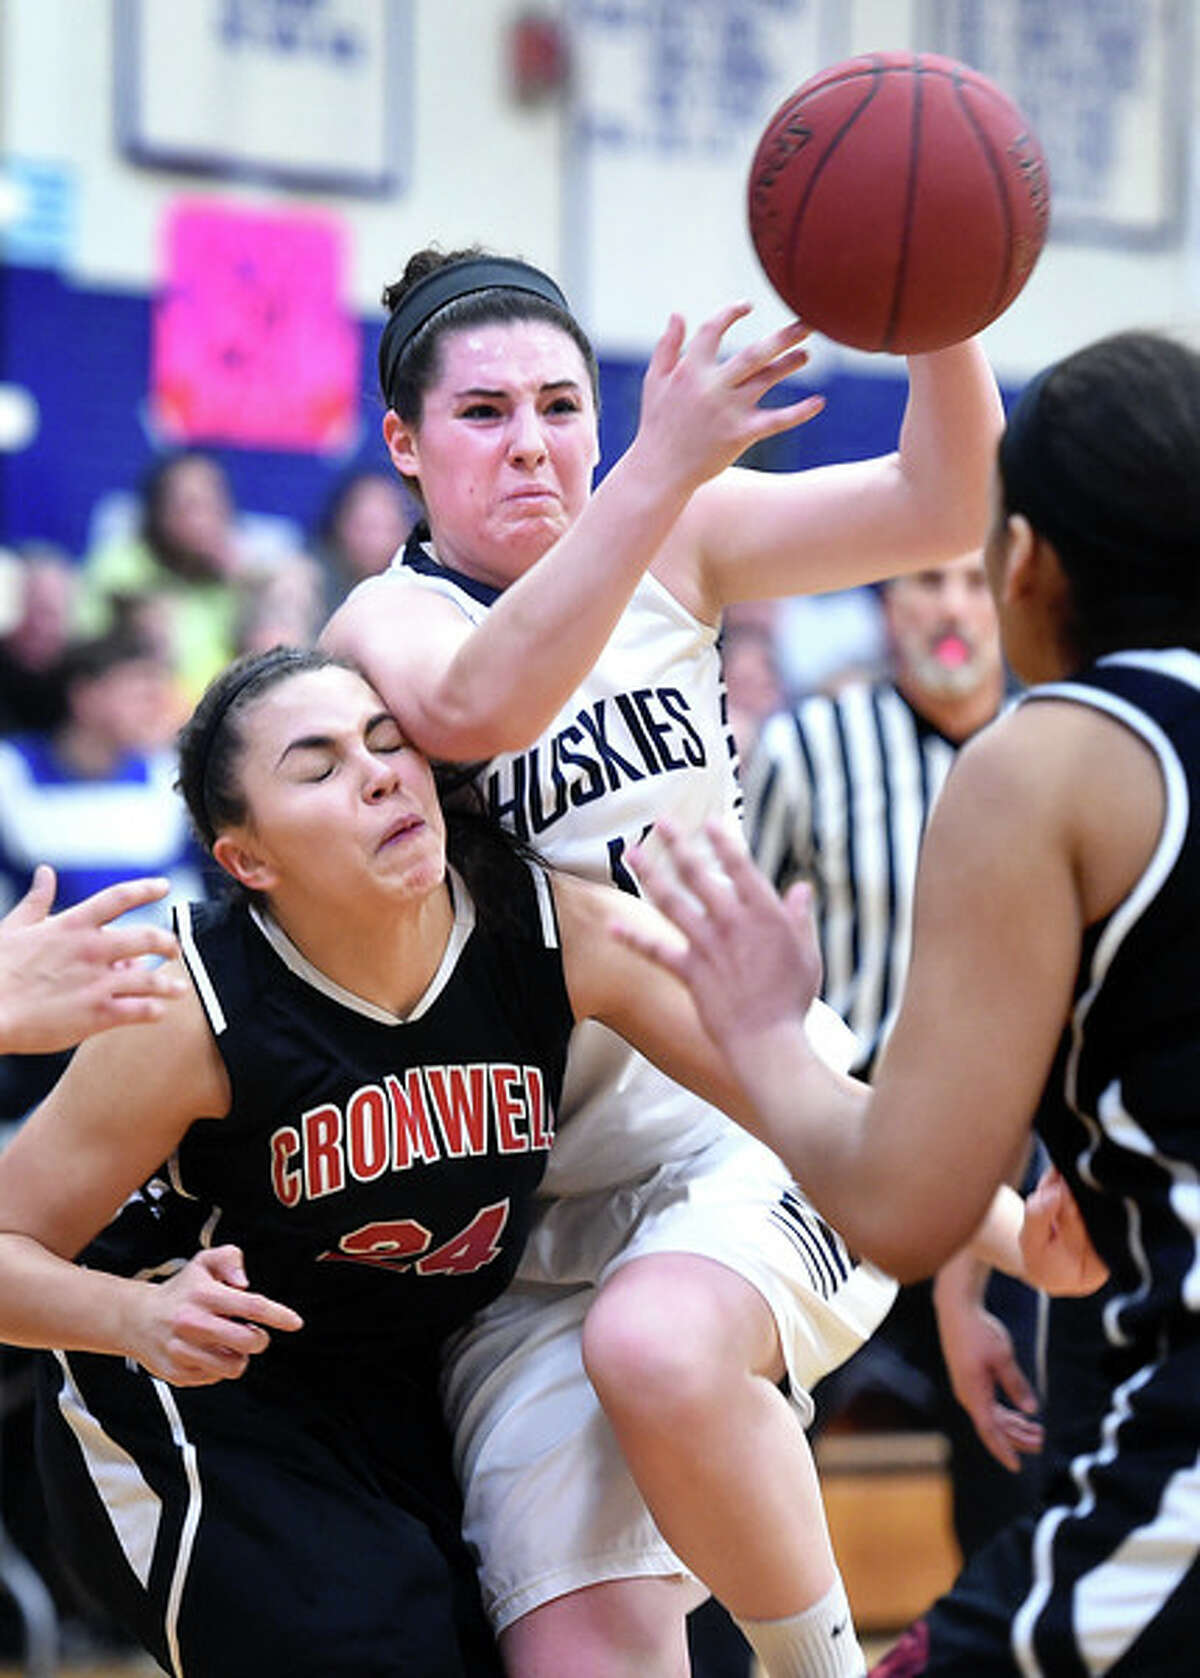 Alyssa Wright (left) of Cromwell collides with Tori Hopkins of Morgan as she drives to the basket in the first half in Clinton on 2/16/2015. Photo by Arnold Gold/New Haven Register